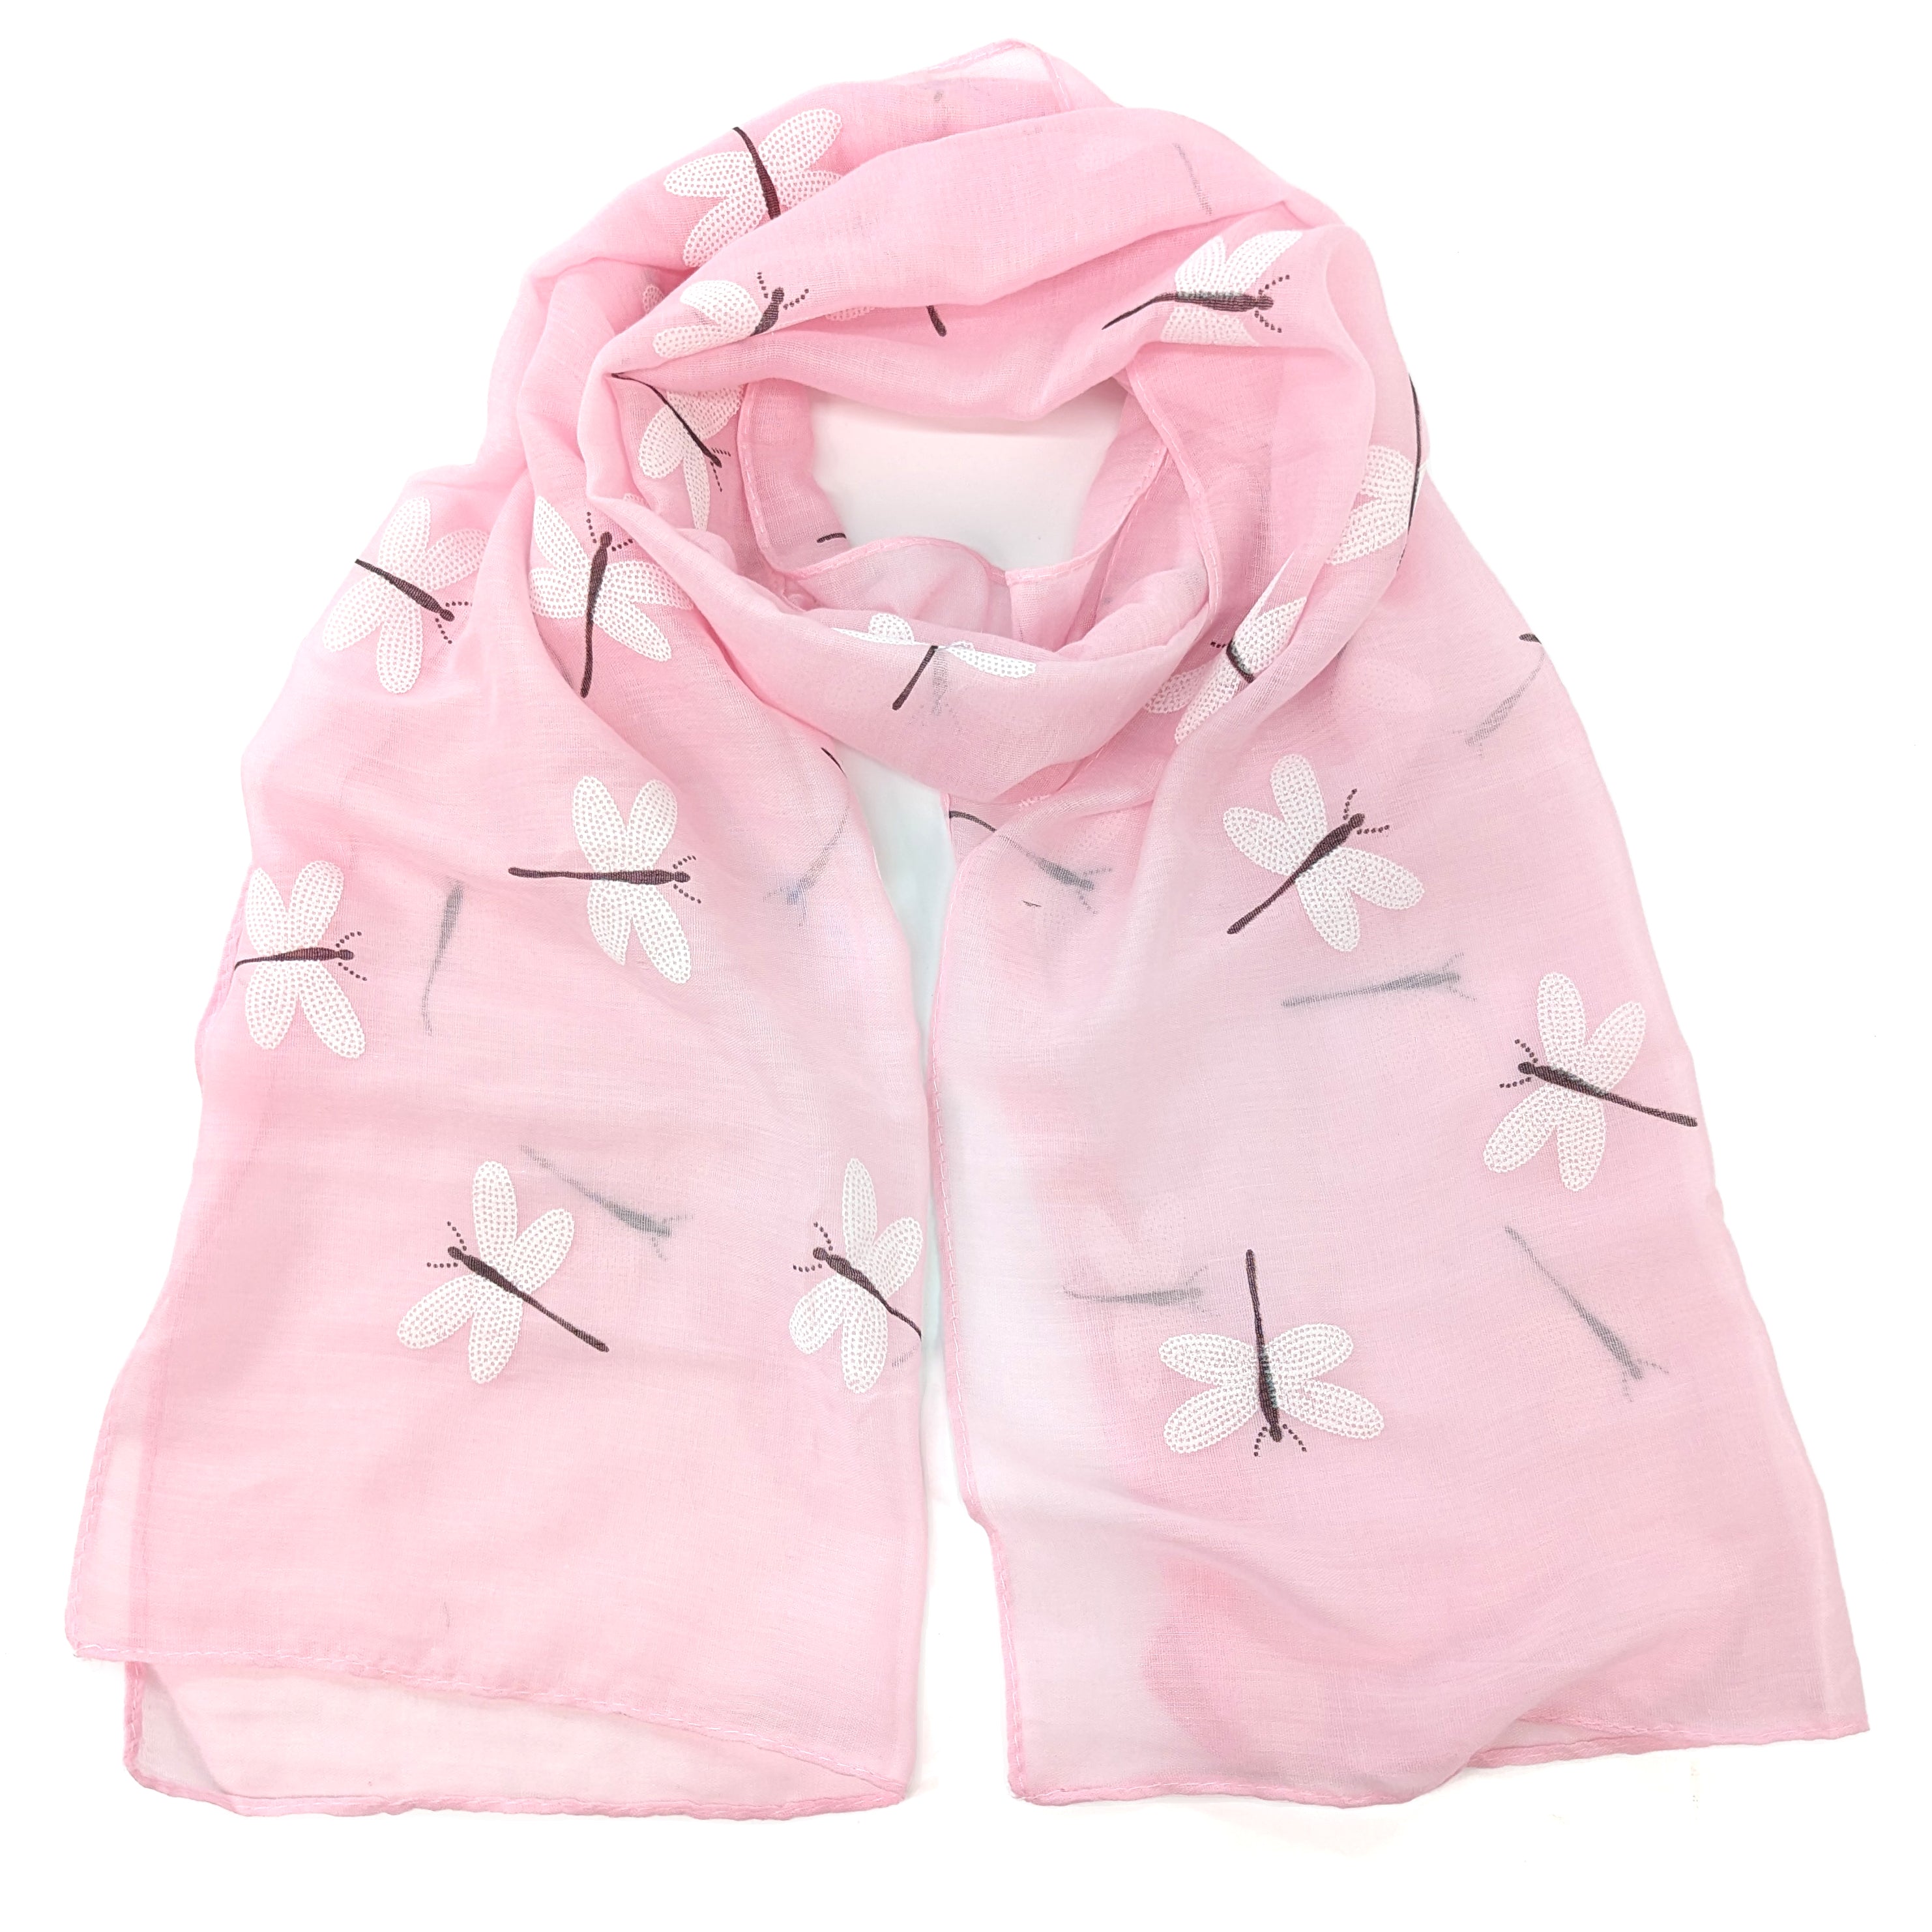 Marle - White Dragonfly Scarf (50x180cm) - Ballet Pink